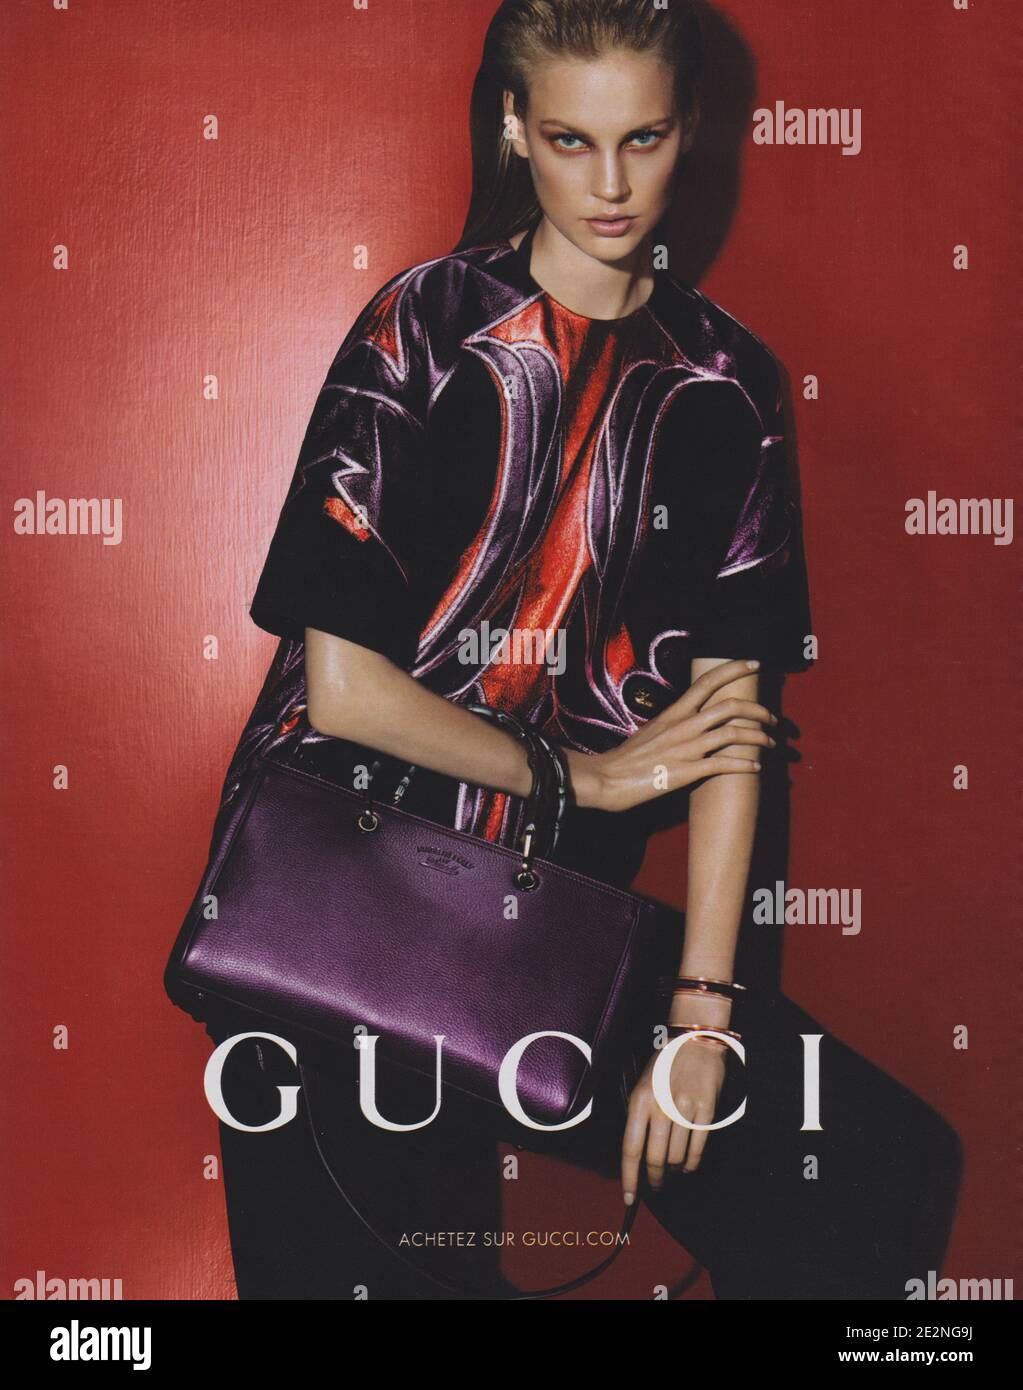 poster advertising GUCCI fashion house with Elisabeth Erm in paper magazine  from 2014 year, advertisement, creative GUCCI advert from 2010s Stock Photo  - Alamy